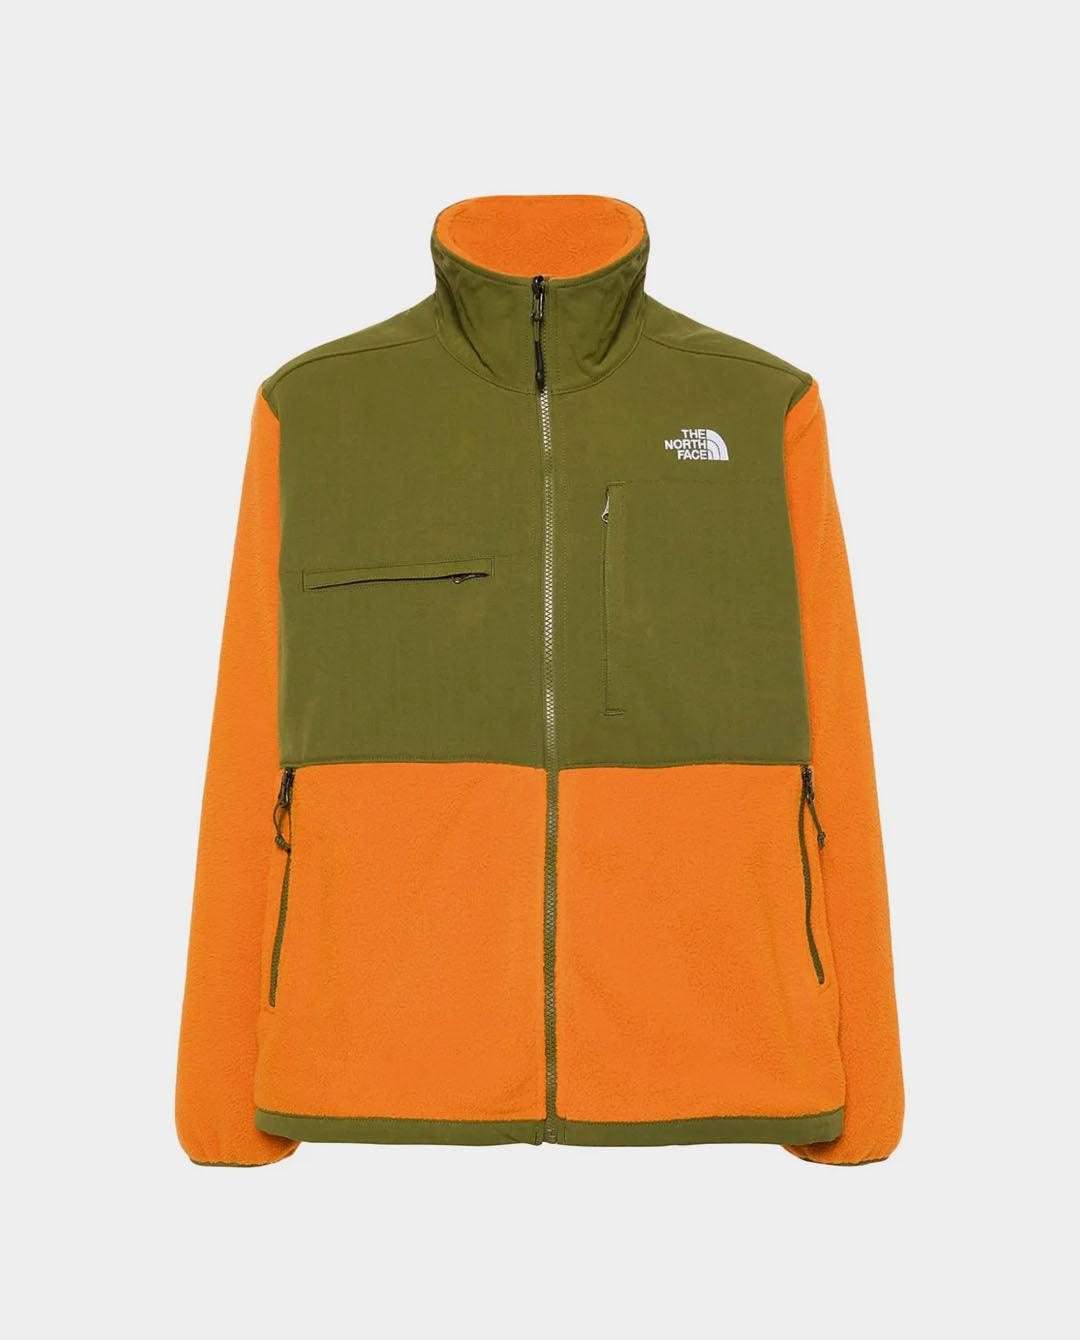 The North Face - Denali Ripstop Fleece Jacket - Desert Rust/Forest Olive Jackets The North Face   